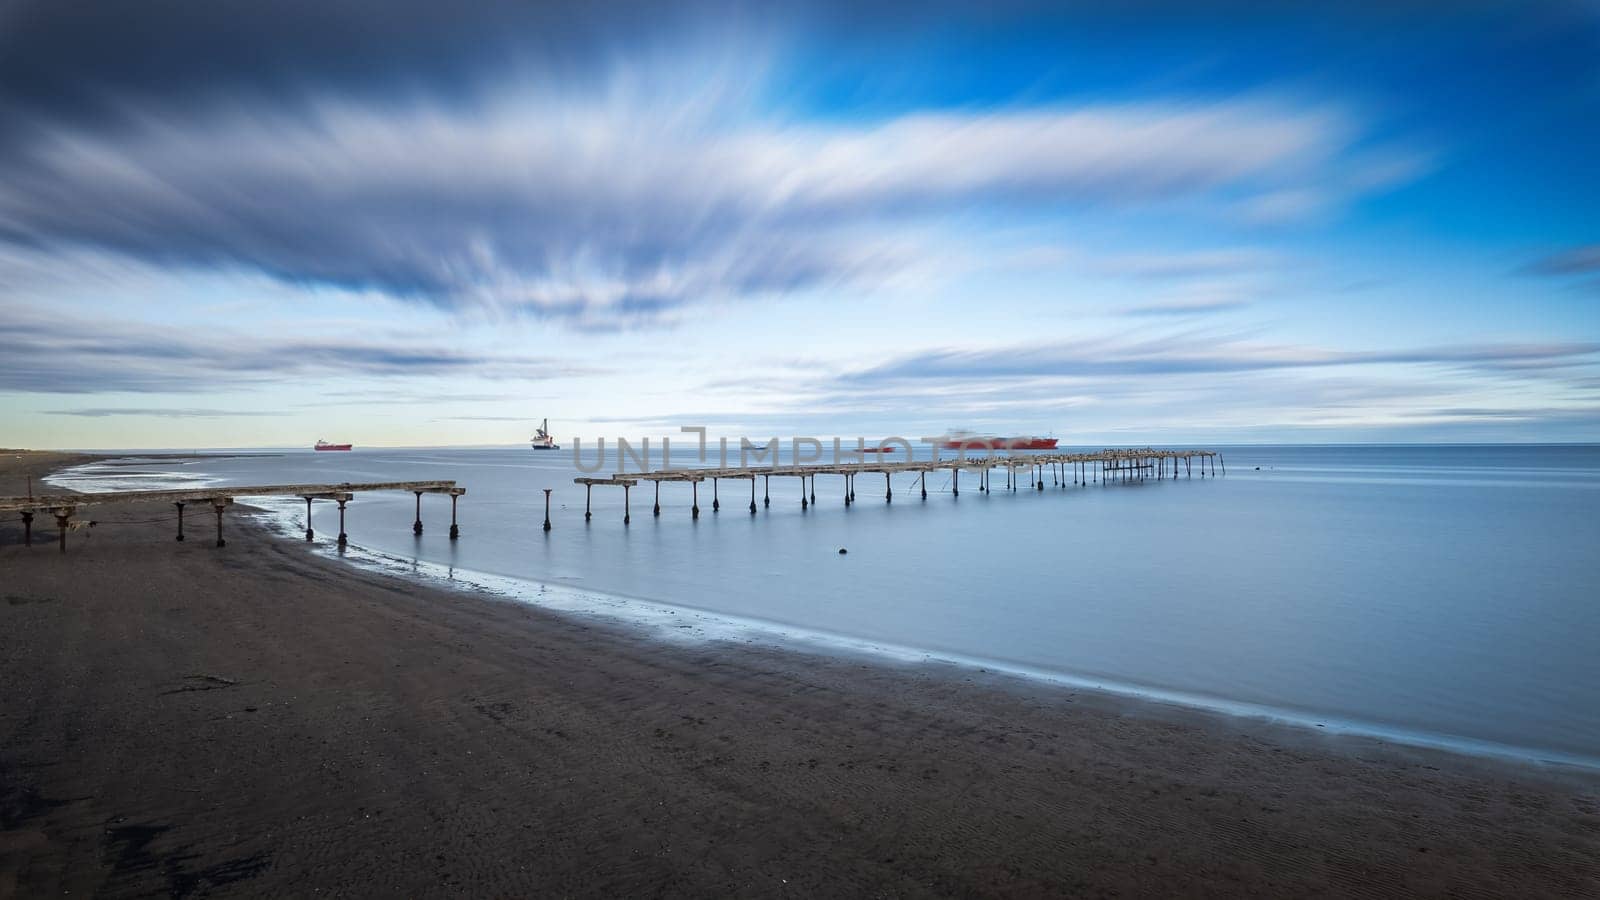 Tranquil sea with decaying pier captured in long exposure under dynamic clouds.